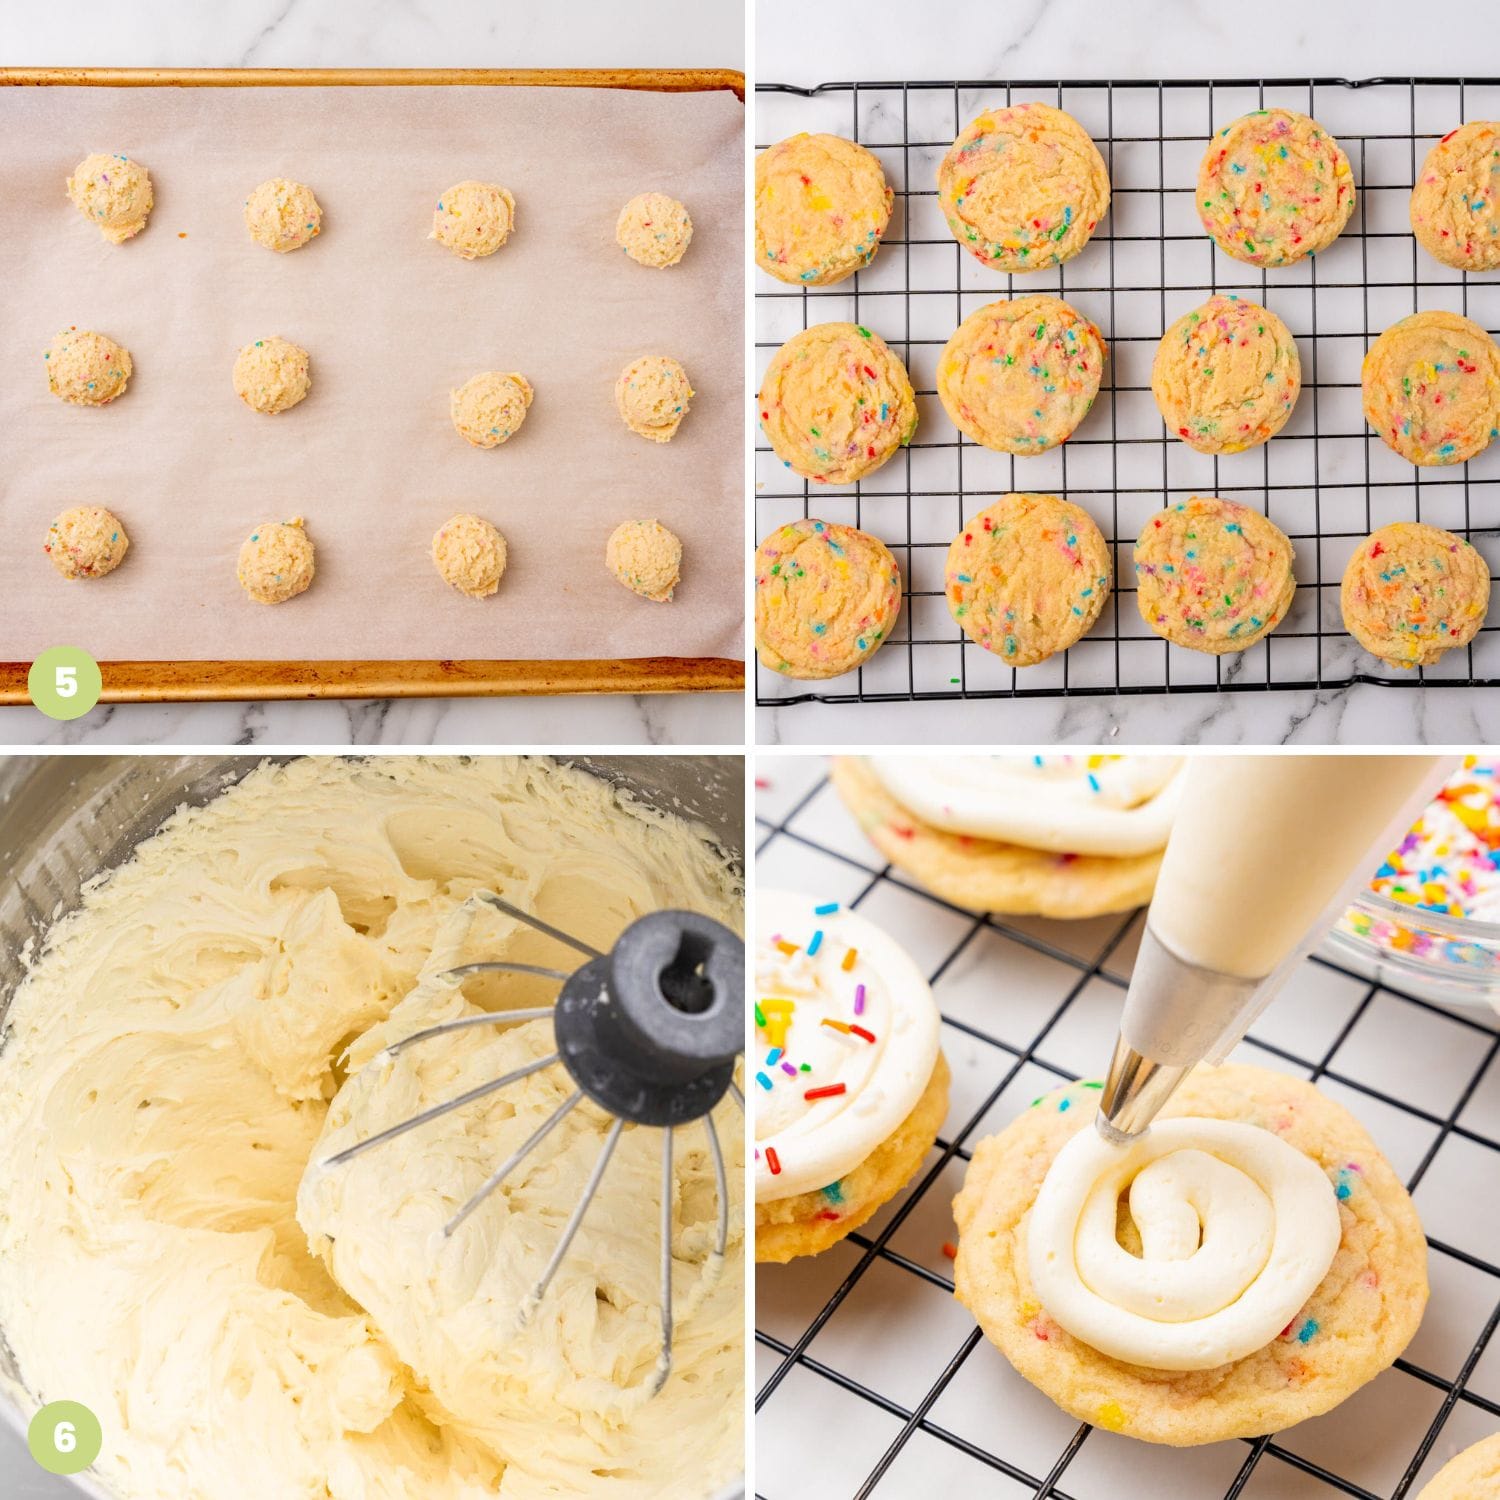 A collage of images showing how to bake birthday cake cookies and make frosting for them.